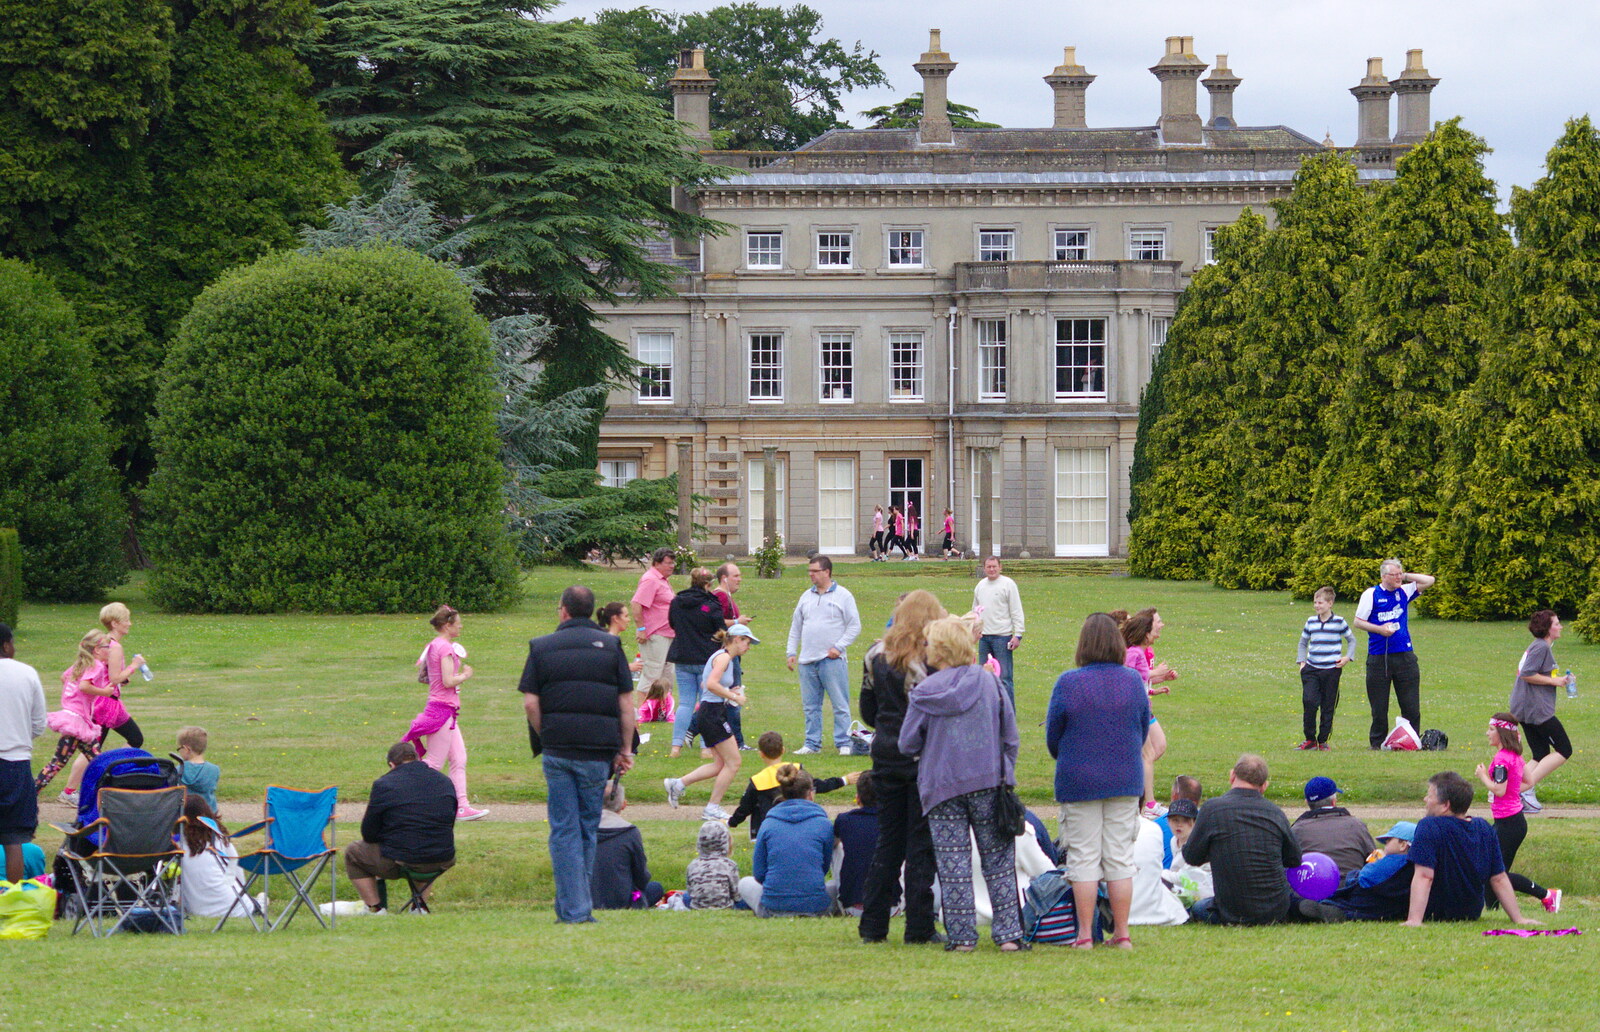 The runners pass Chantry House and back from Isobel's Race For Life, Chantry Park, Ipswich - 11th June 2014